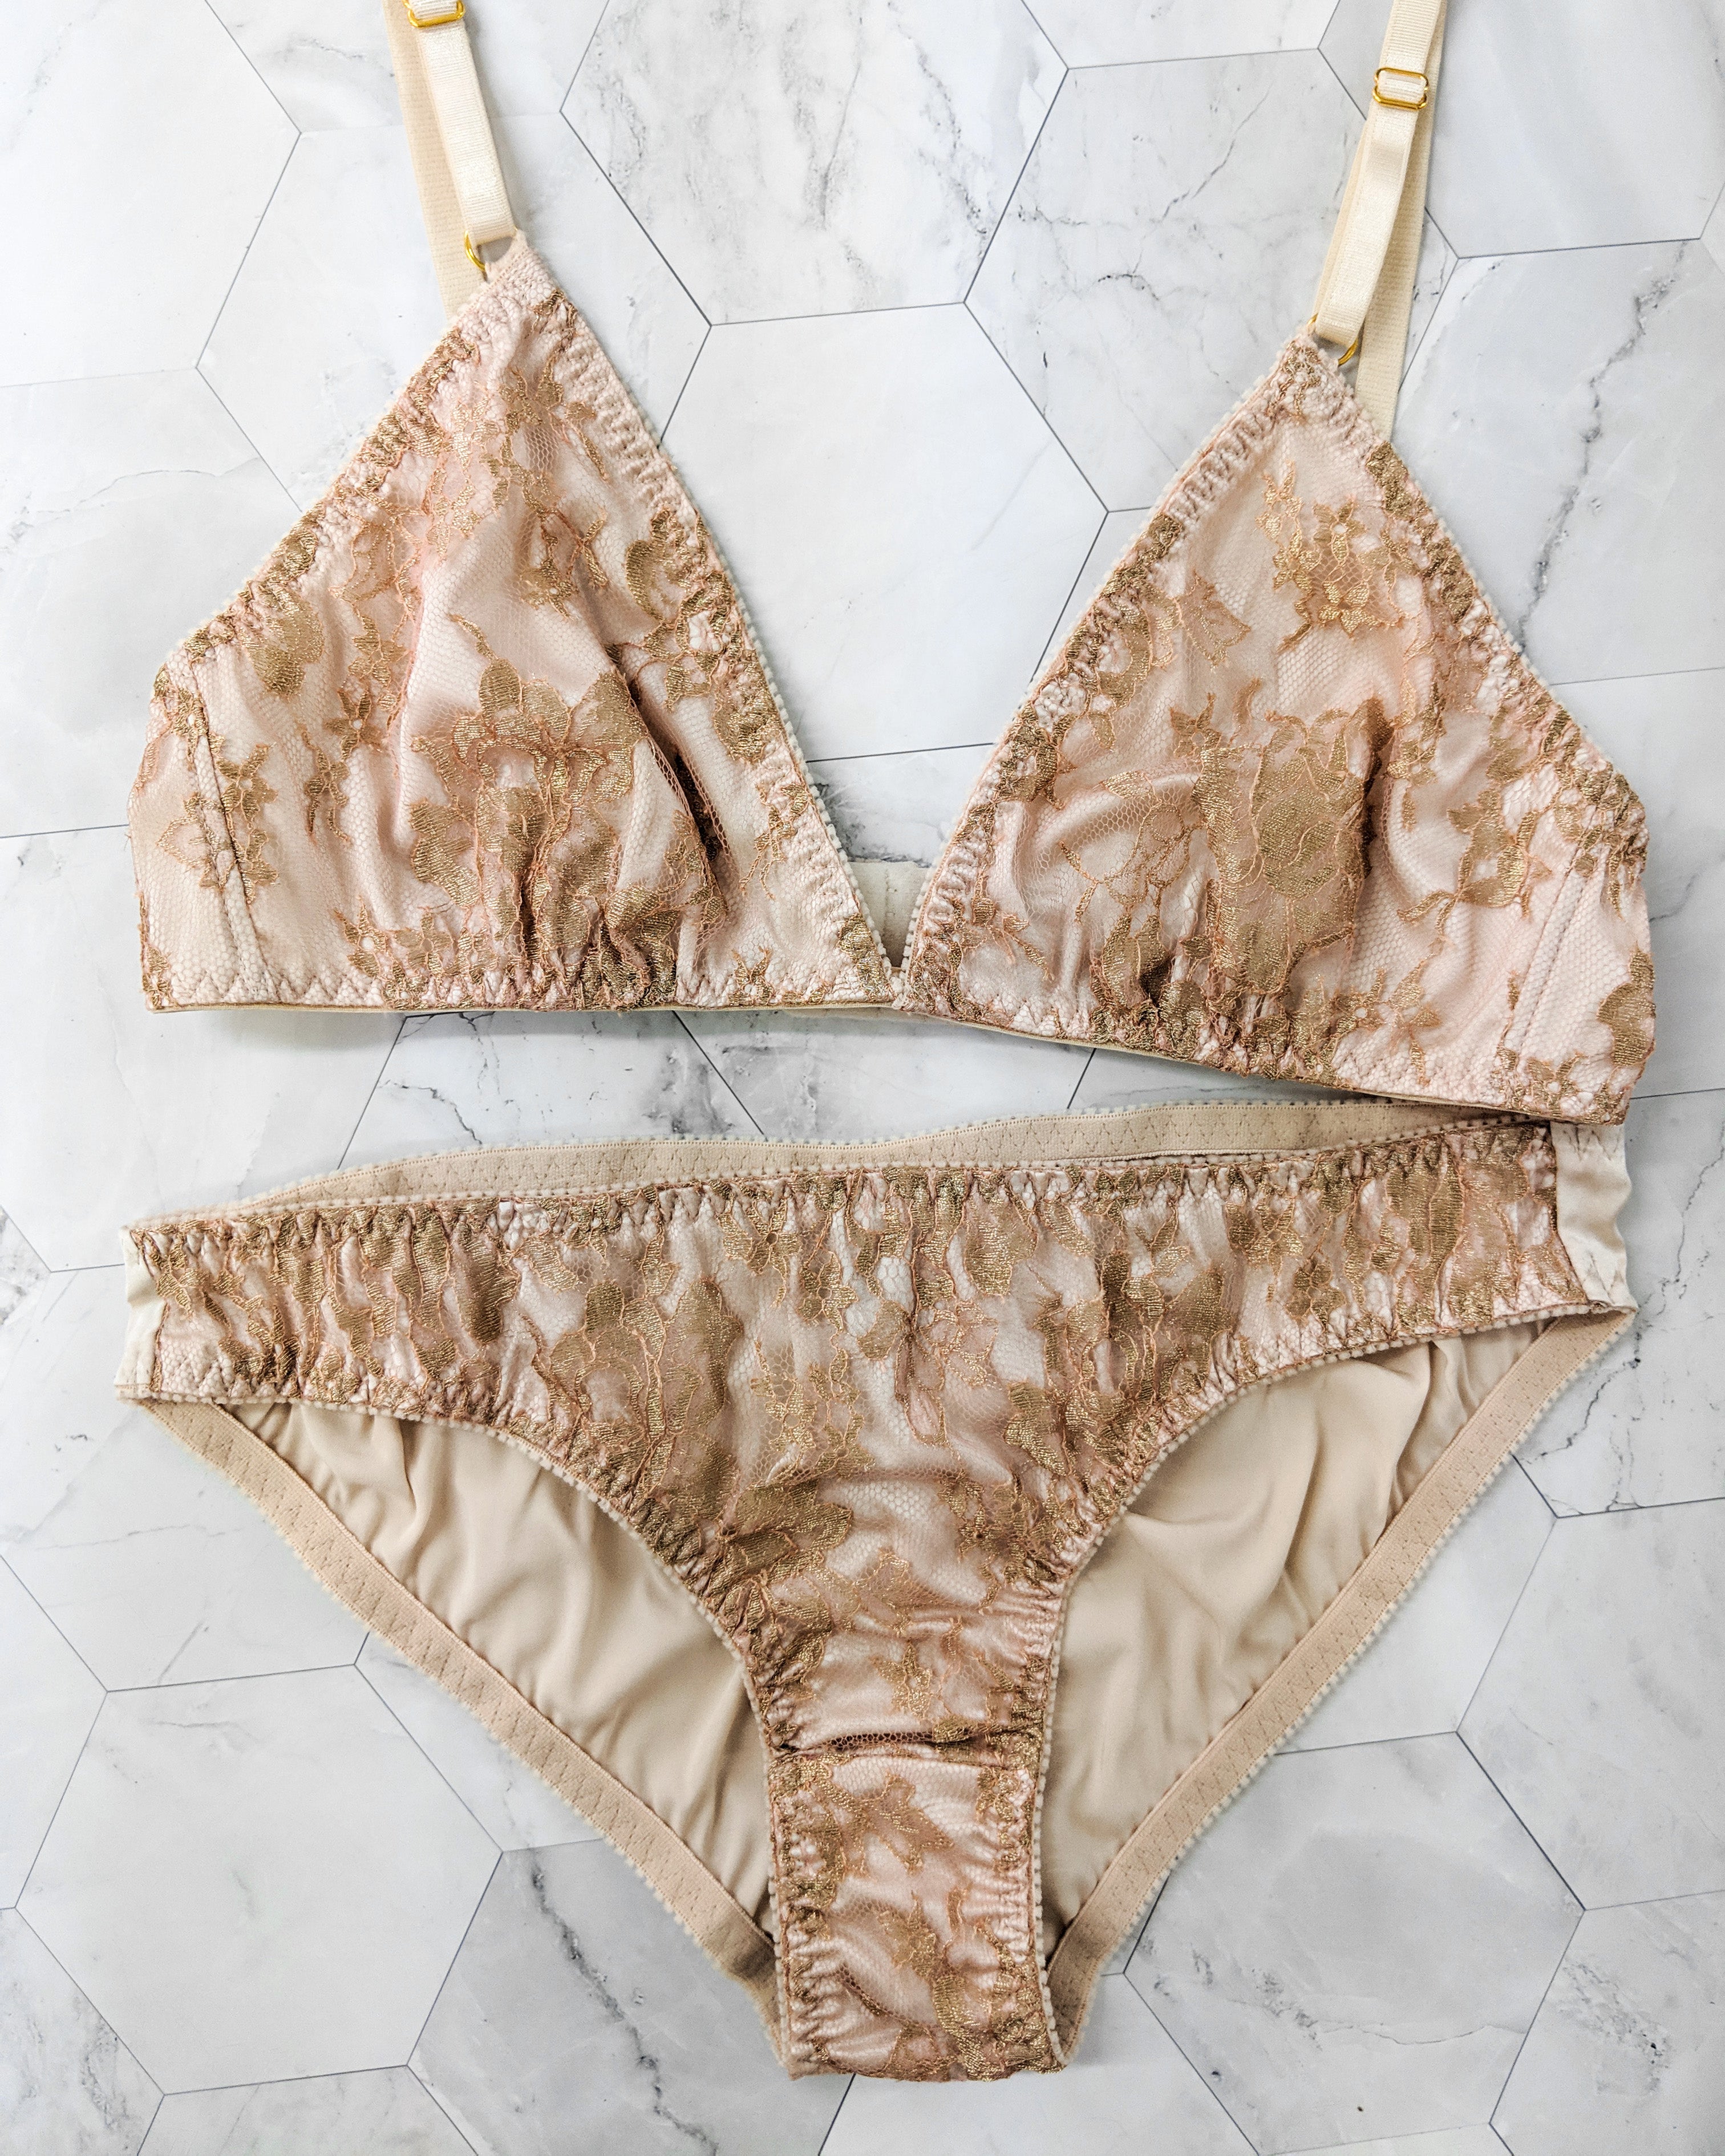 Peach lingerie set in a vintage style with french lace overlays and 100% silk satin lining